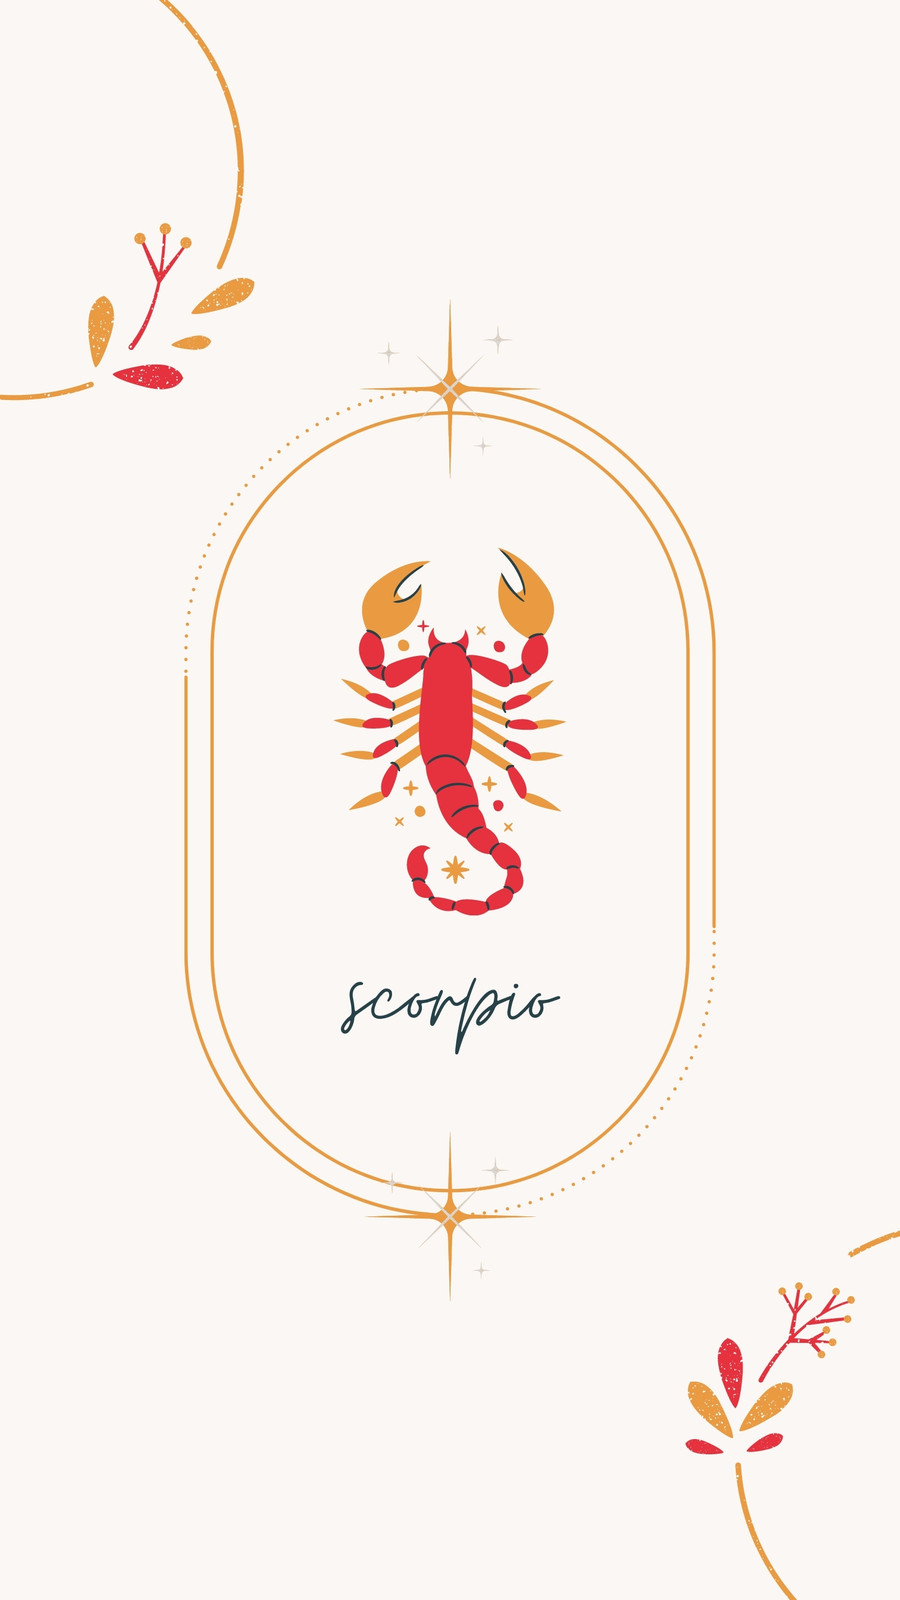 Scorpio Small Fresh Cute Illustration Background Scorpio Constellation  Constellation Background Background Image And Wallpaper for Free Download